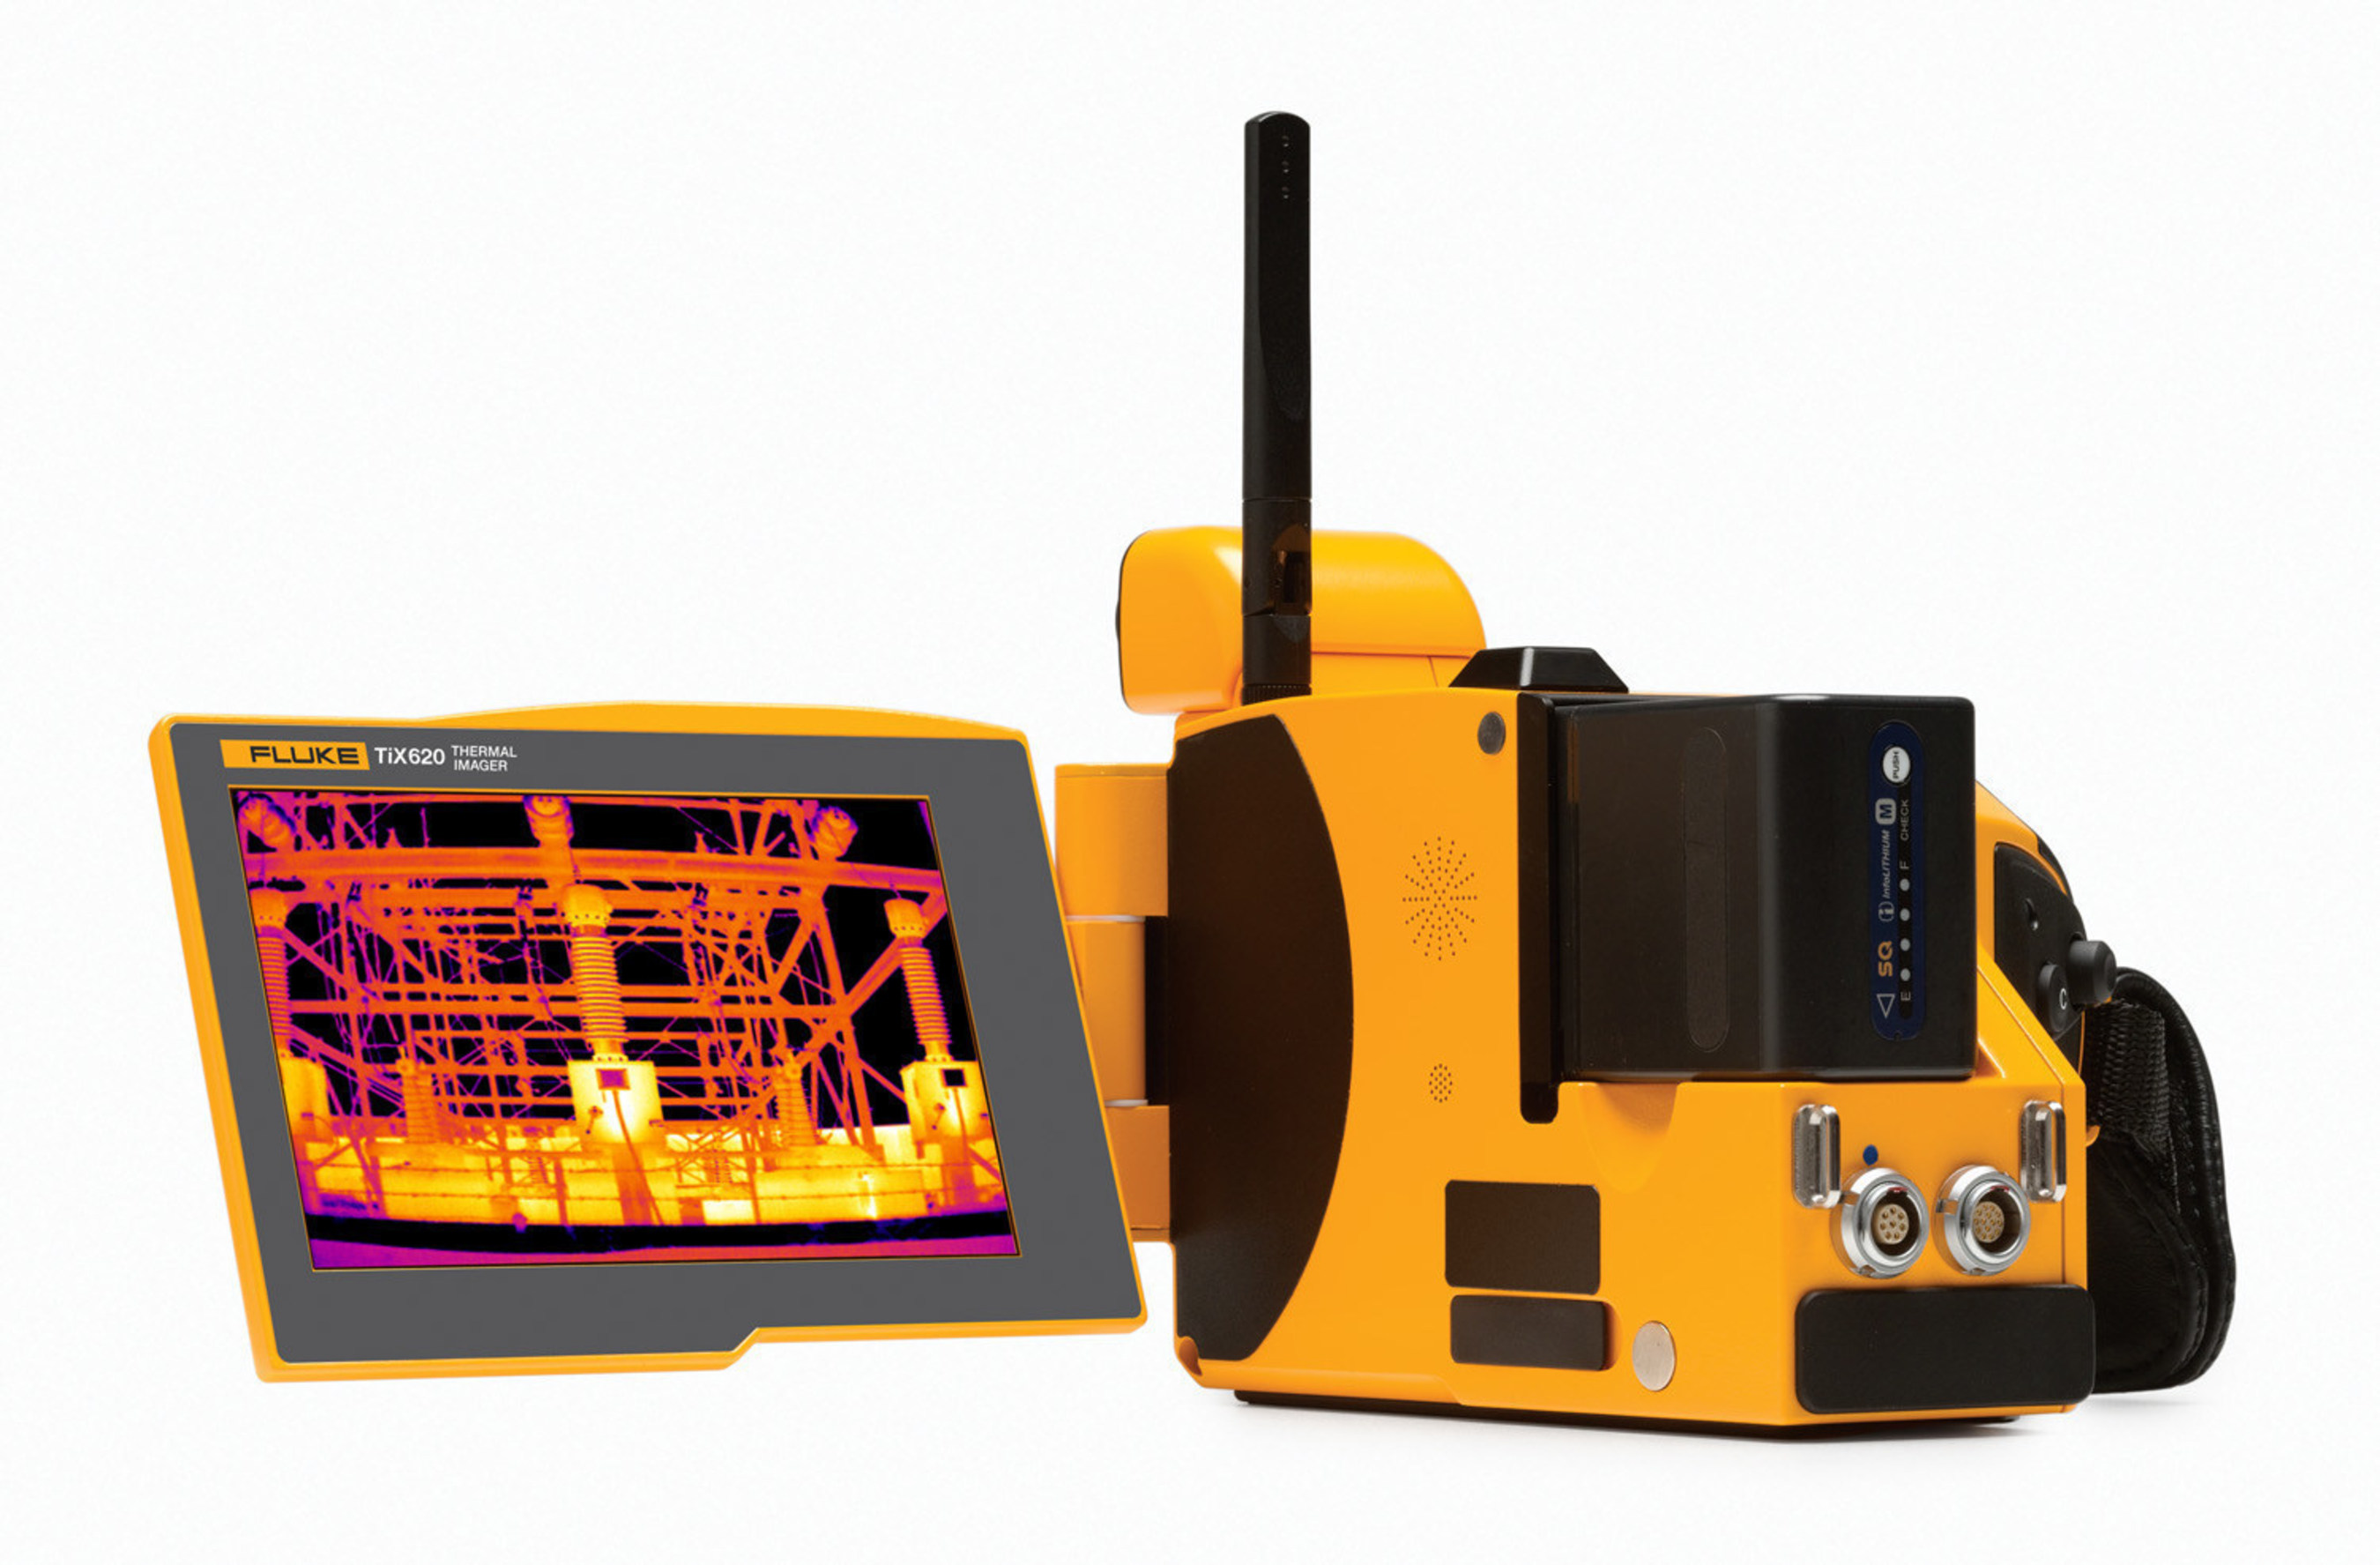 The TiX620 is an ideal infrared camera for the experienced thermographer. Its 640 x 480 resolution provides high measurement accuracy and 5.6 inch high-resolution LCD screen affords a premium in-field viewing experience making identification of problem spots quicker and easier.